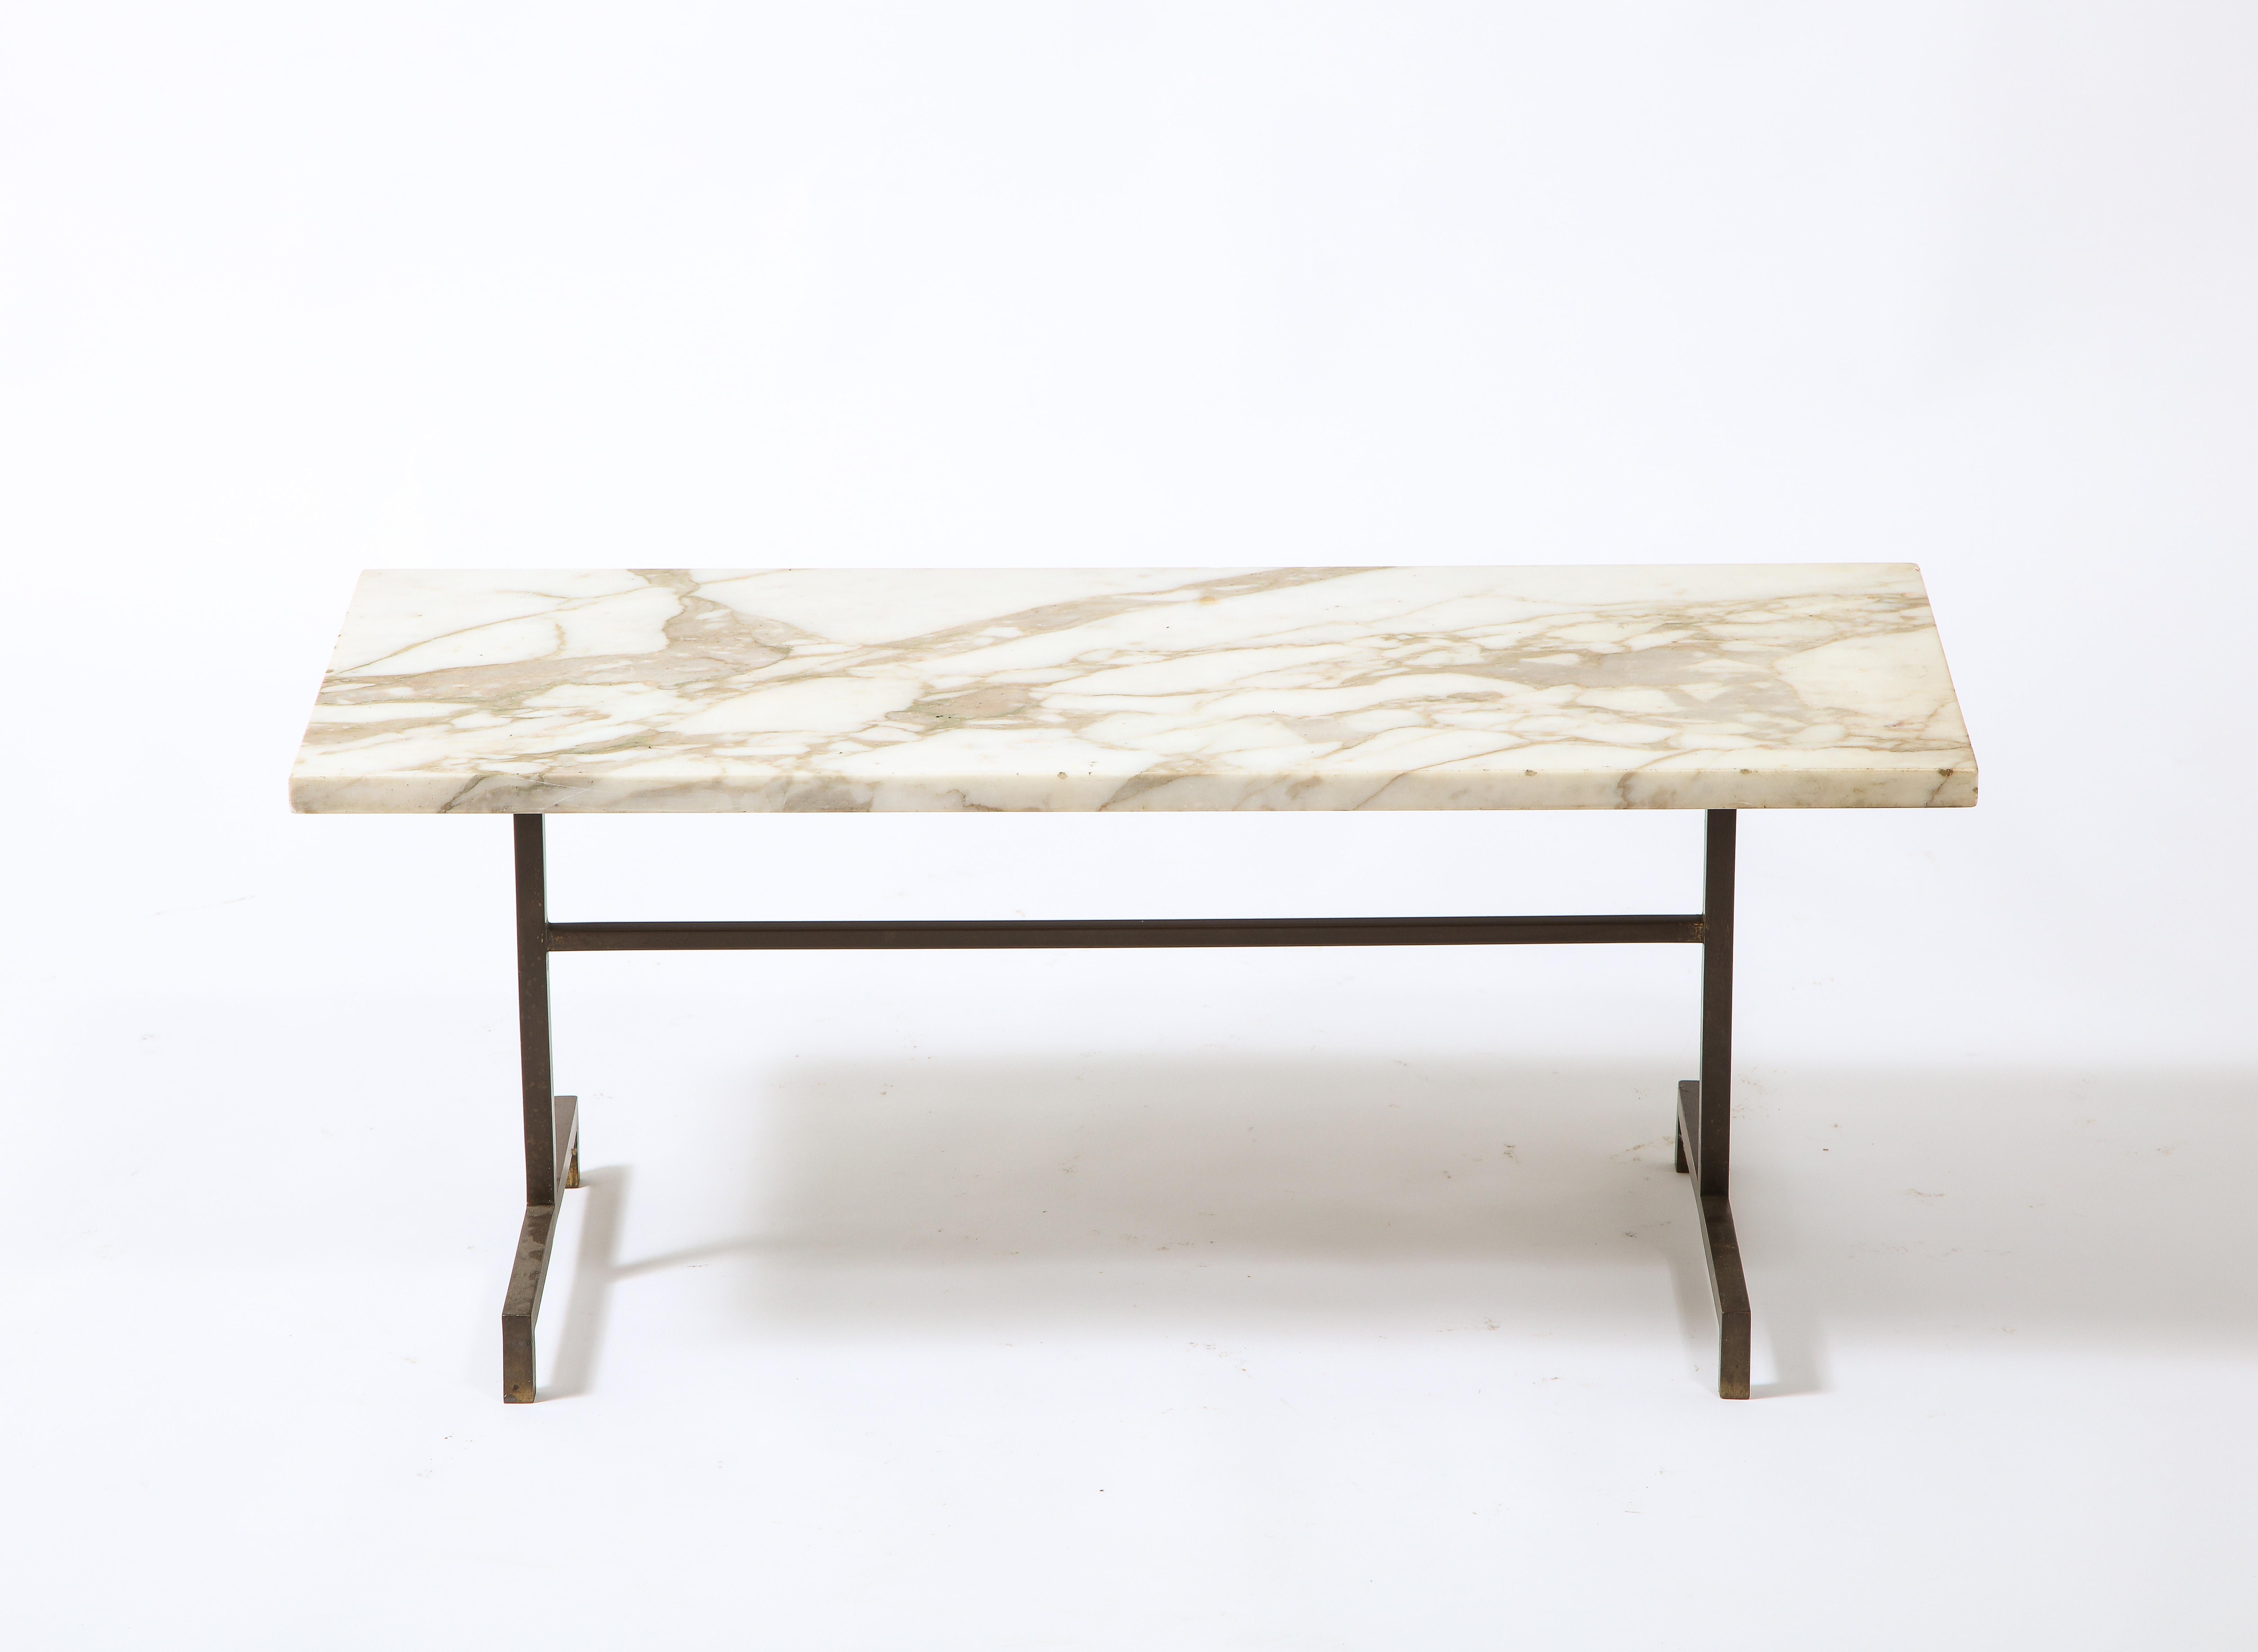 Simple Modernist Duplantier Style Marble & Brass End Table, France 1950's For Sale 3